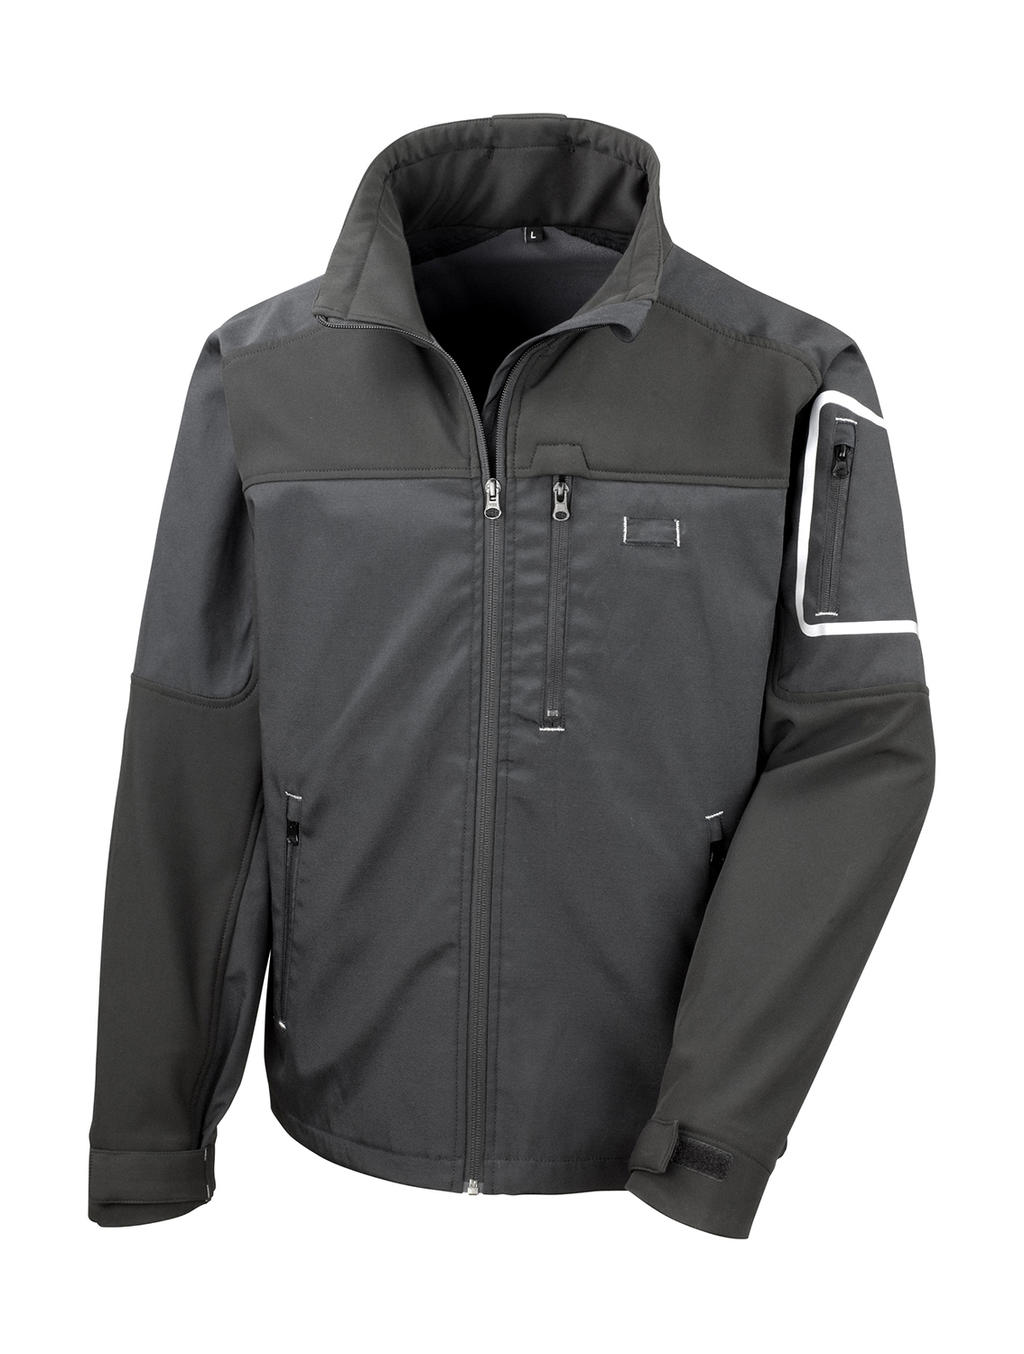  Work-Guard Sabre Stretch Jacket in Farbe Black